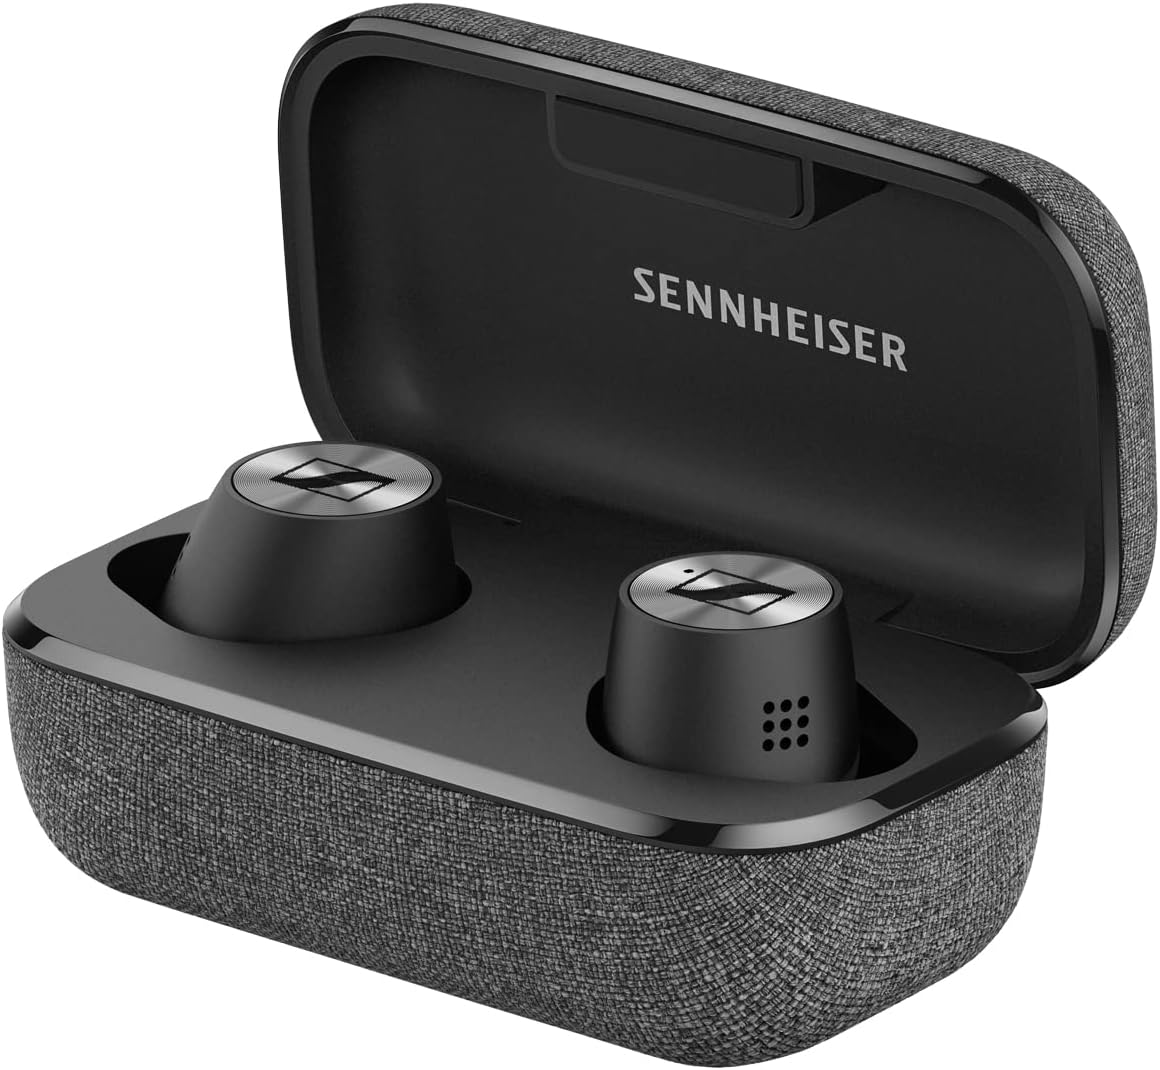 Sennheiser Consumer Audio Momentum True Wireless 2 - Bluetooth in-Ear Buds with Active Noise Cancellation